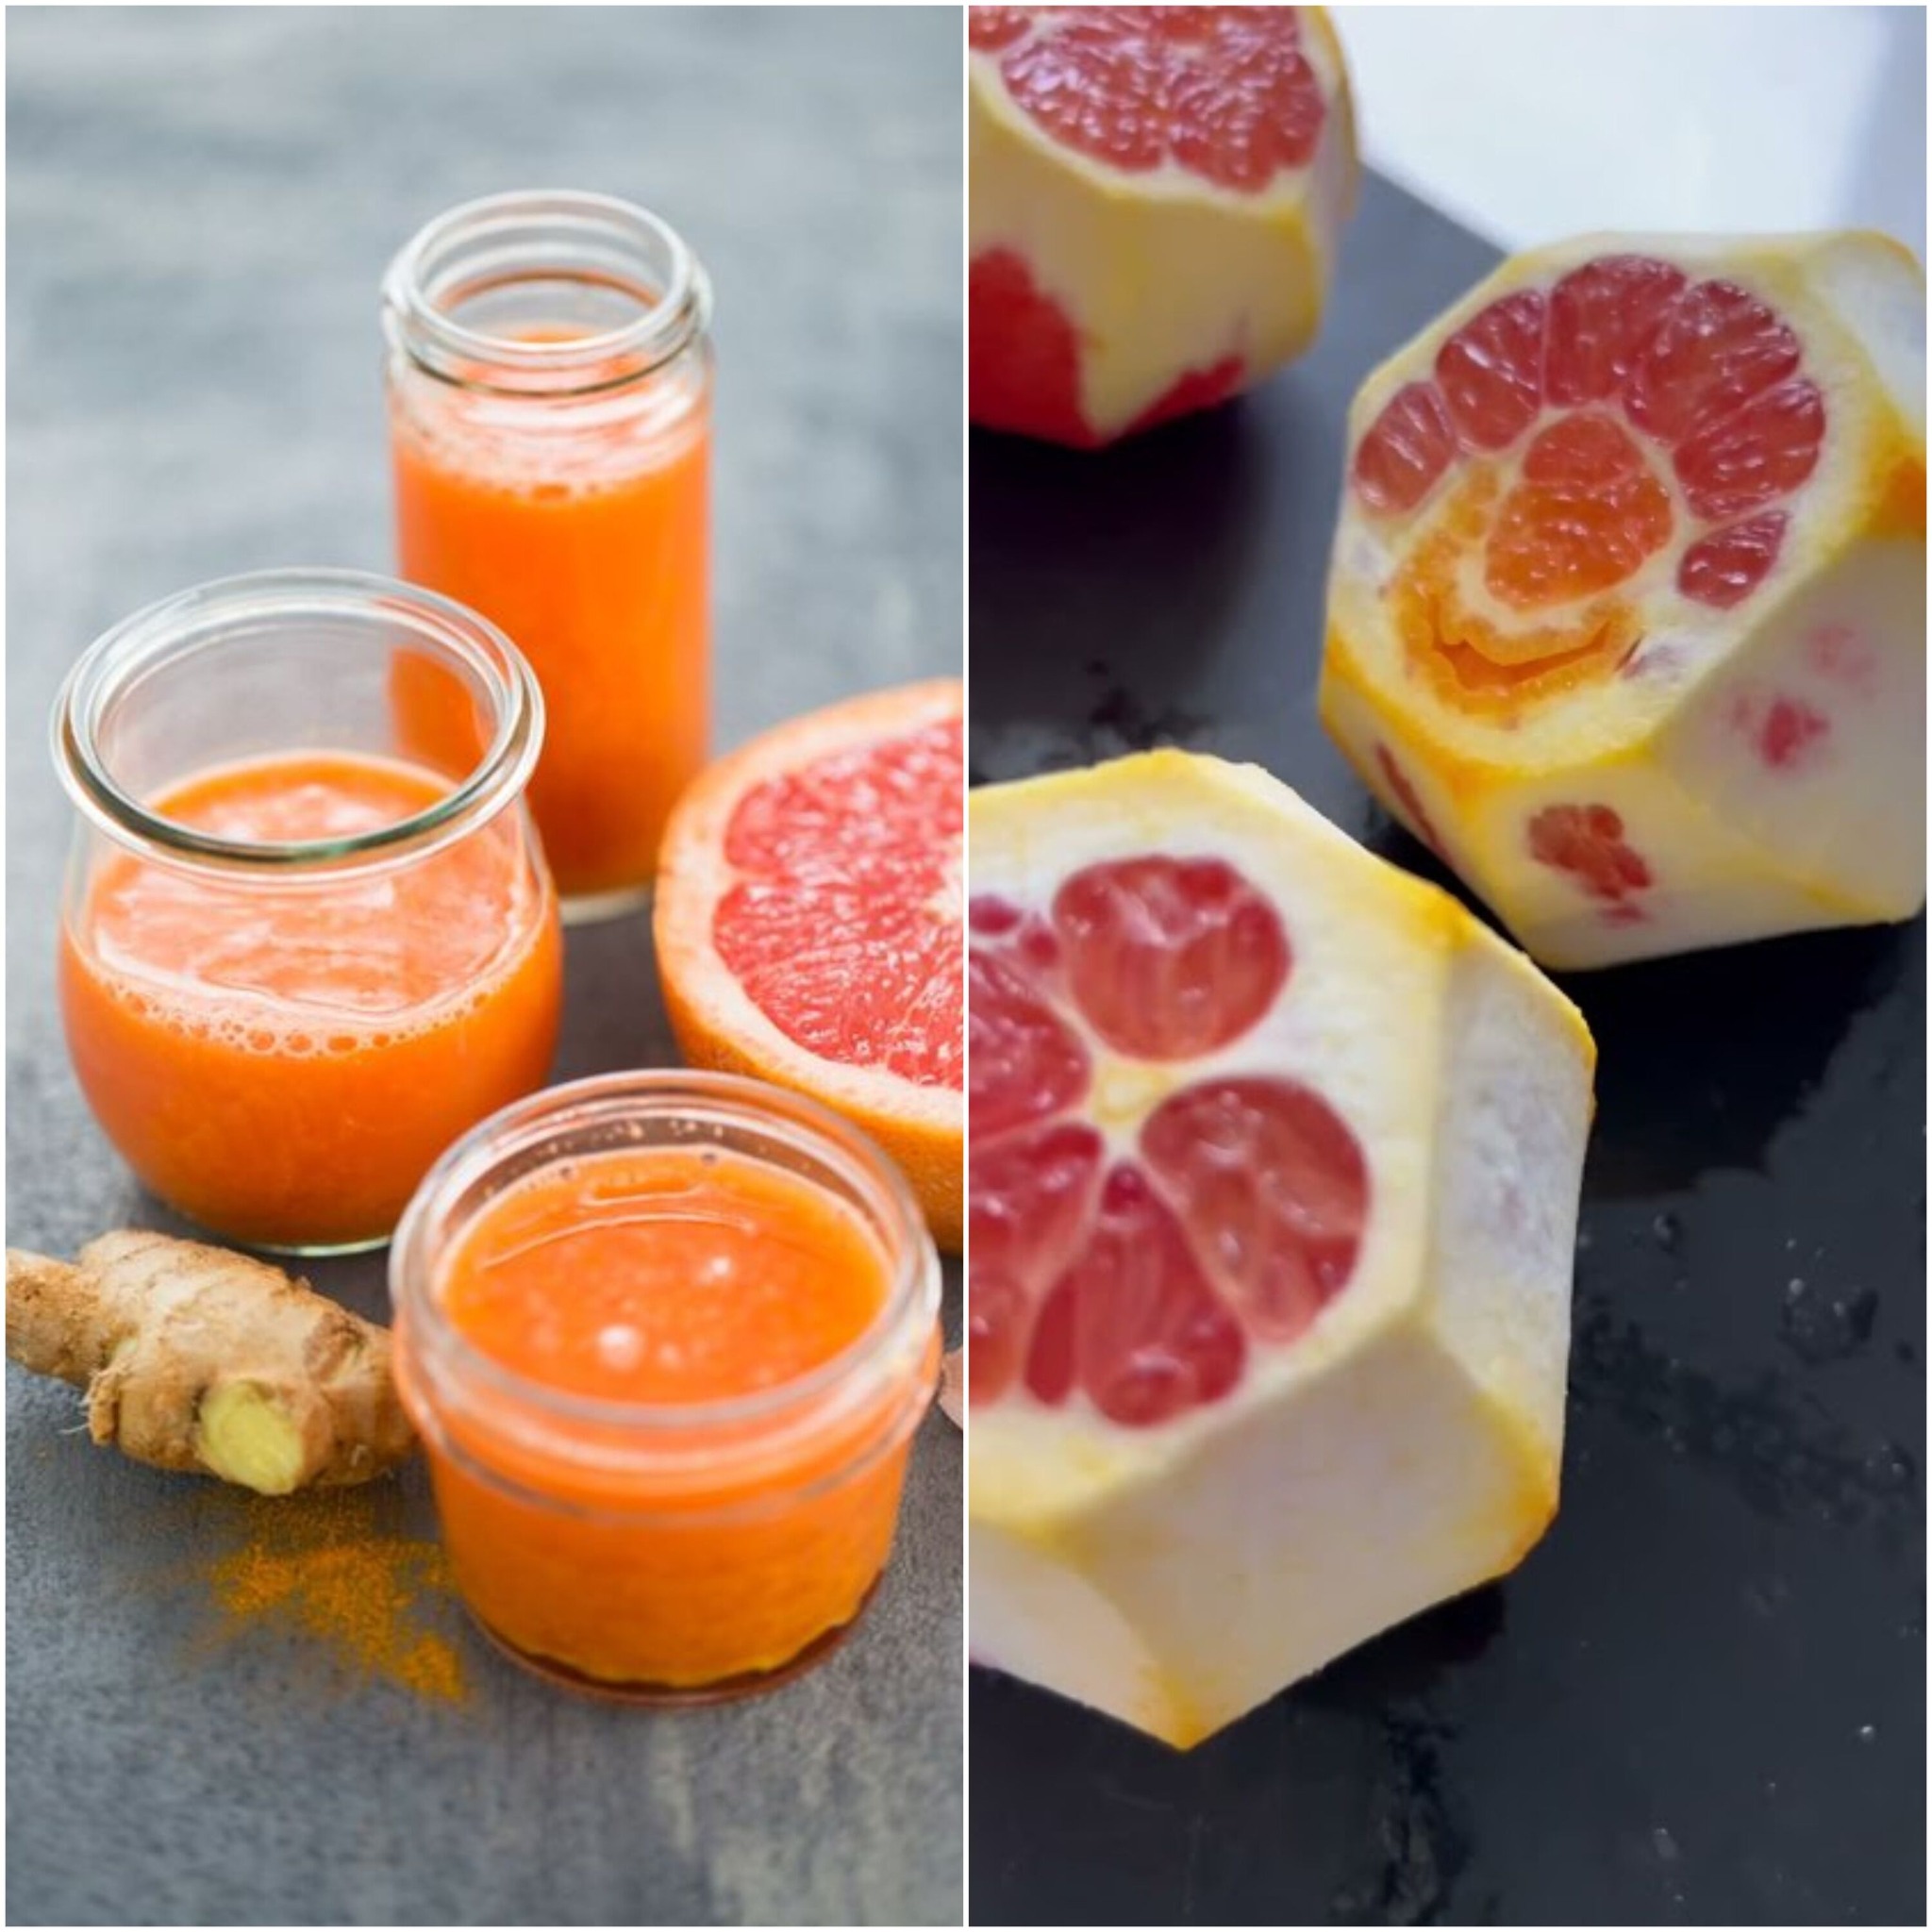 Rejuvenate Your Health with Ginger and Turmeric Shots